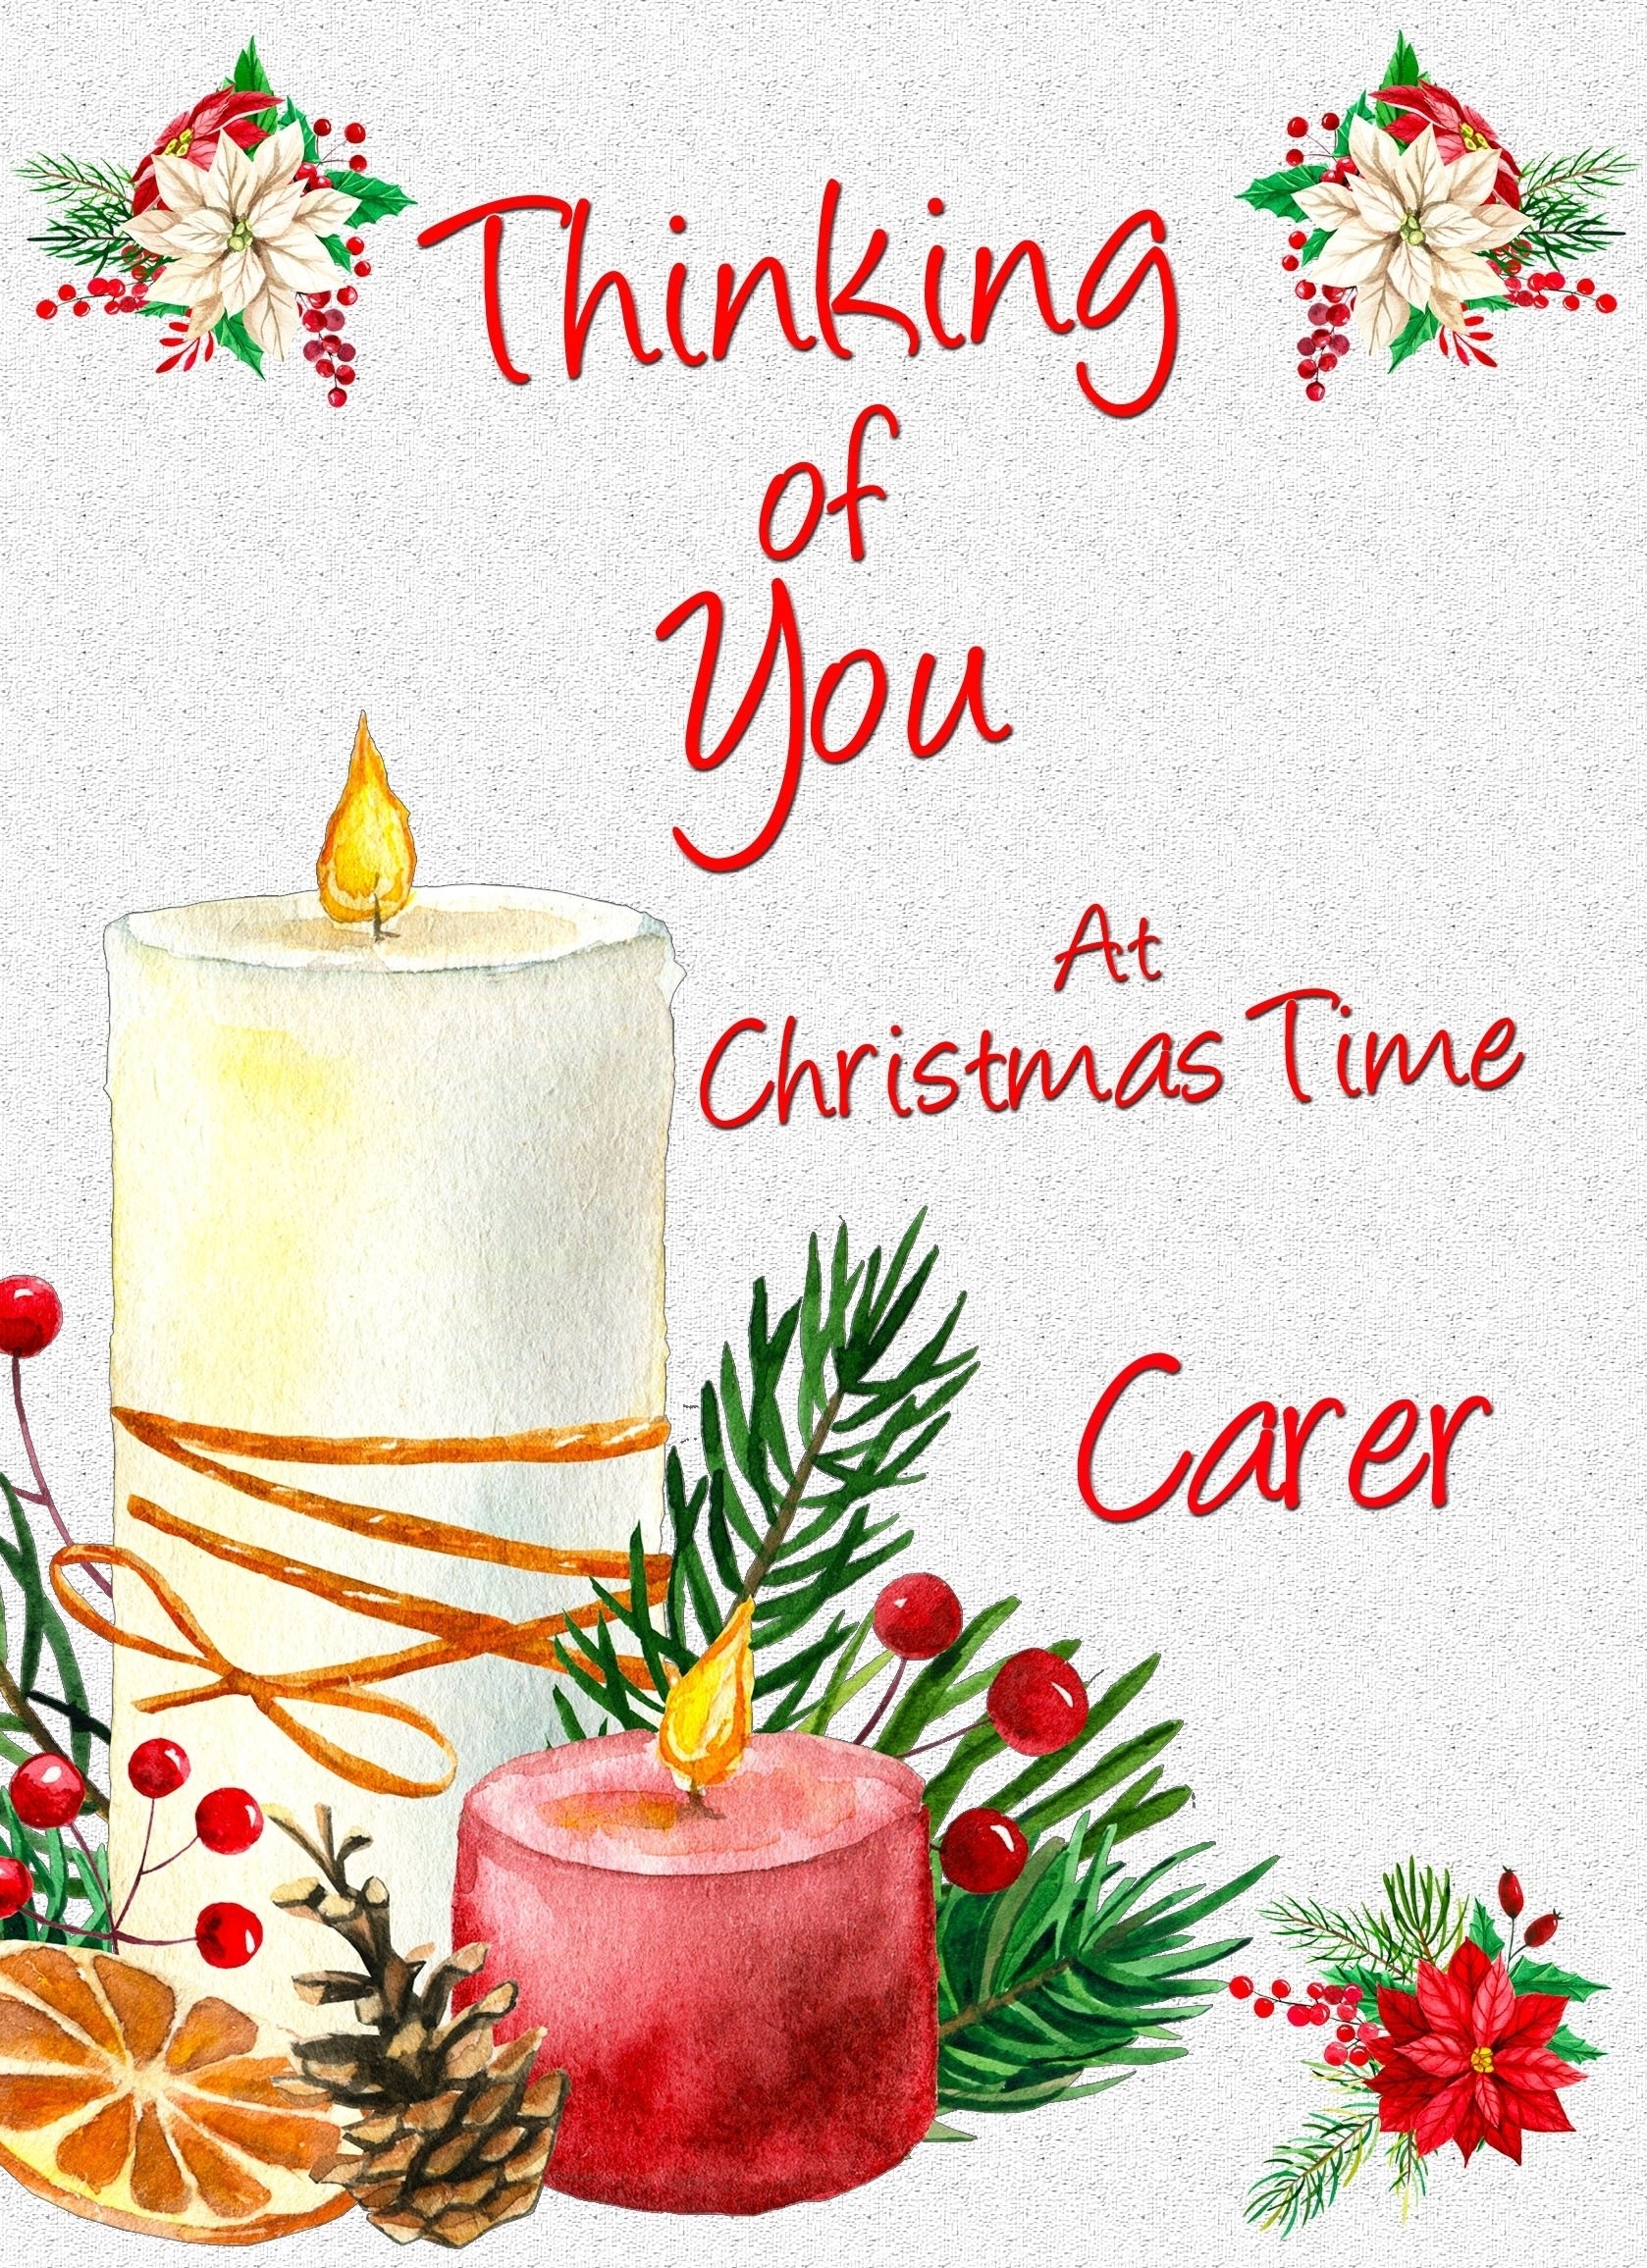 Thinking of You at Christmas Card For Carer (Candle)